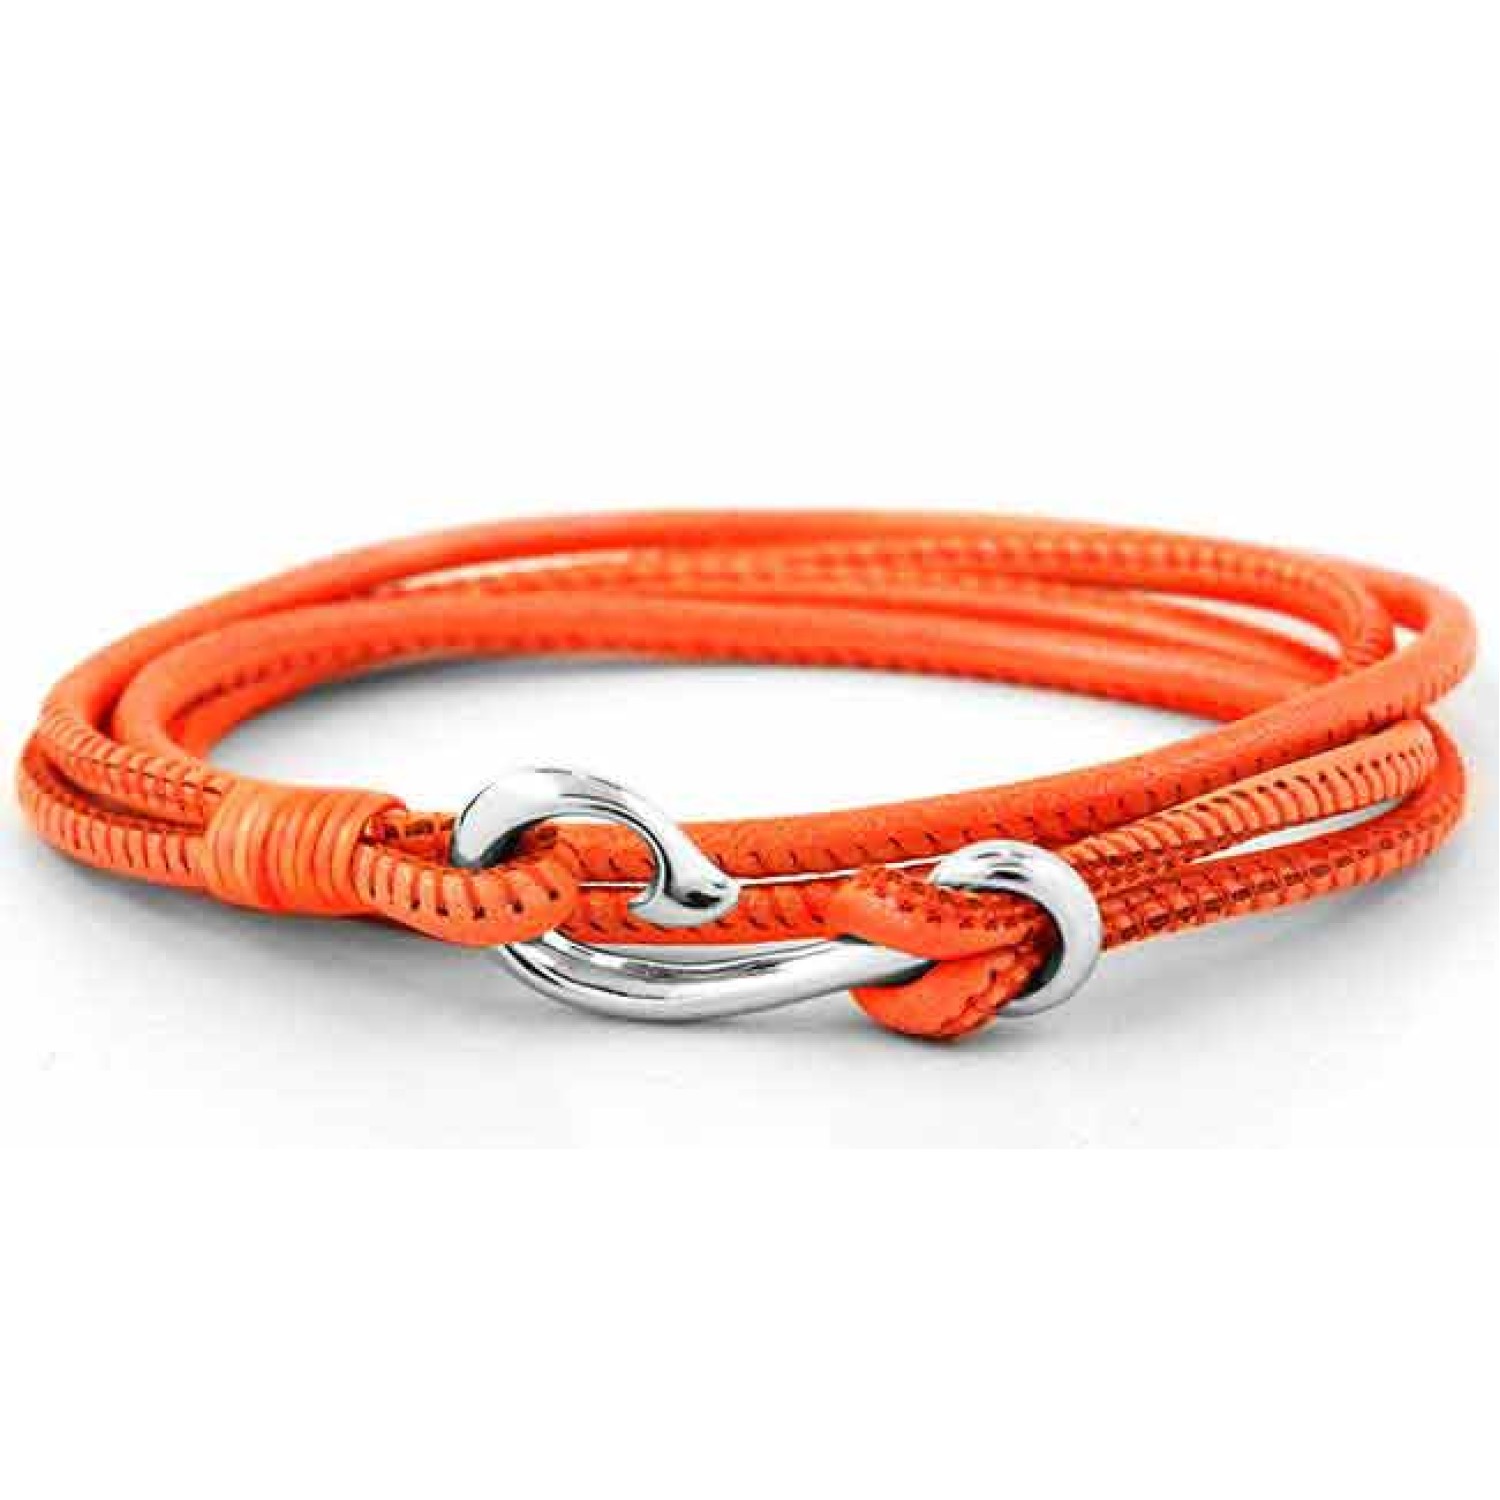 Evolve Safe Travel Wrap Bracelet Orange. The Safe Travel Wrap Bracelet features a sterling silver safe travel hook on soft leather, promising protection and safety as you explore the world. This bracelet wraps around your wrist twice and loops onto the fi